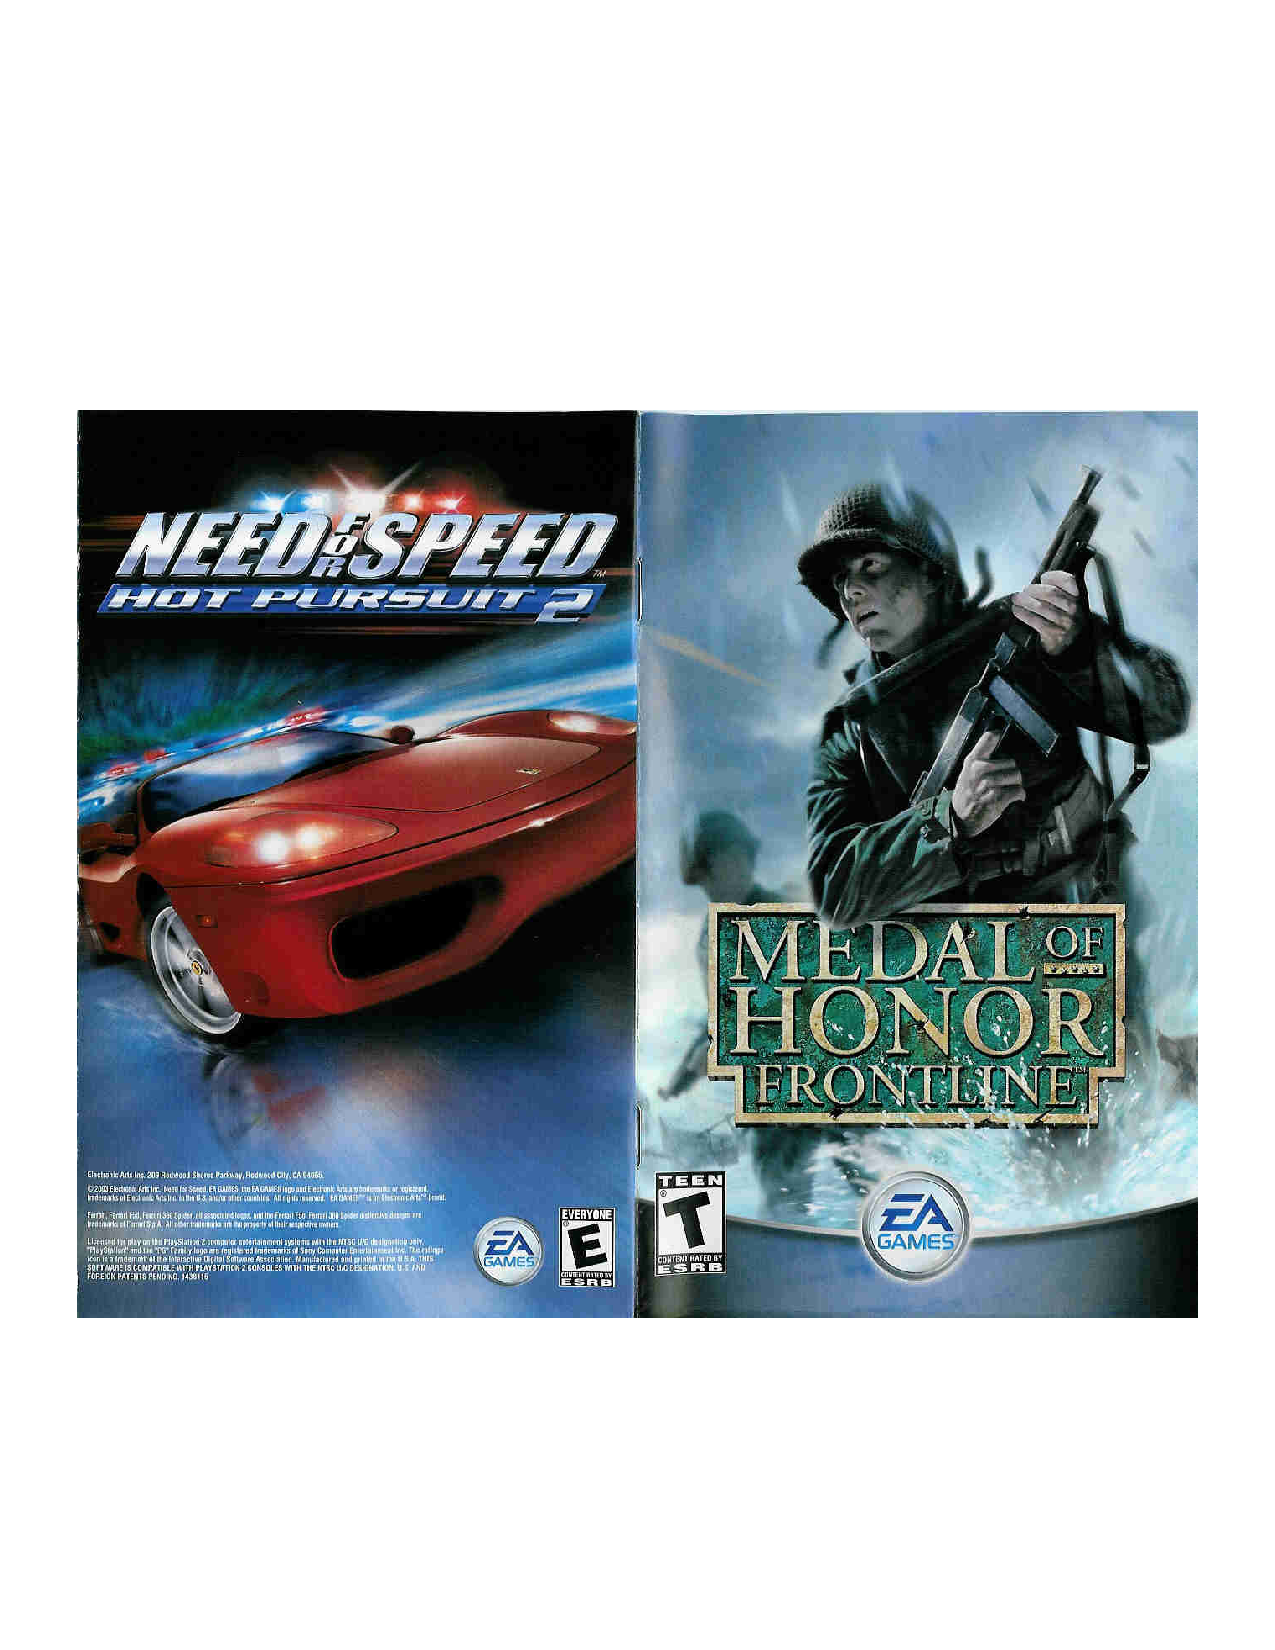 Games PS2 MEDAL OF HONOR FRONTLINE User Manual